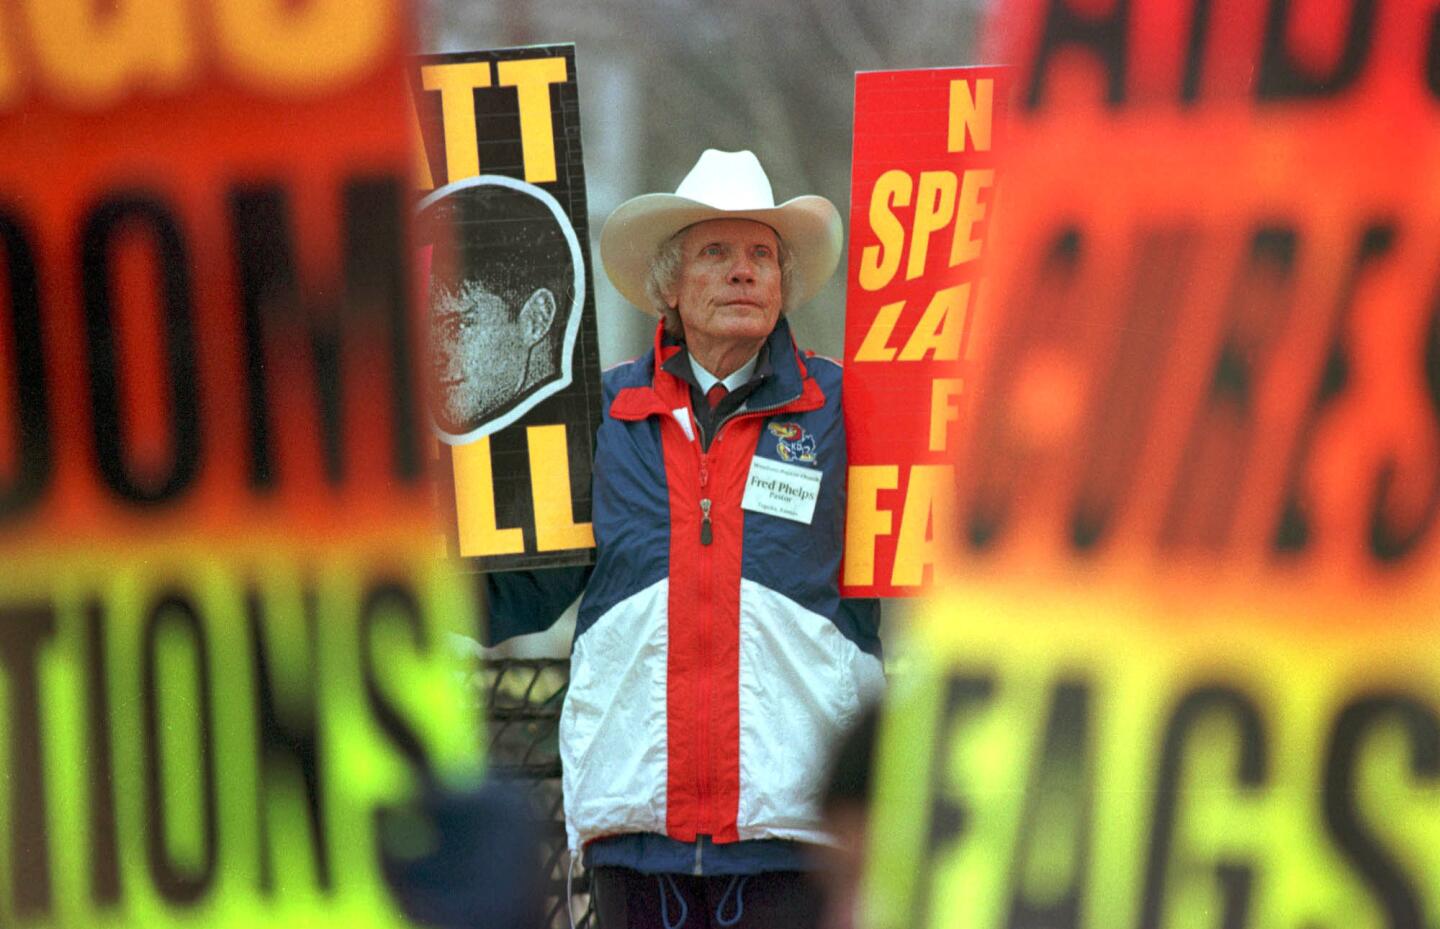 Fred Phelps and members of Westboro Baptist Church demonstrate at the trial of Russell Henderson in the killing of Matthew Shepard.